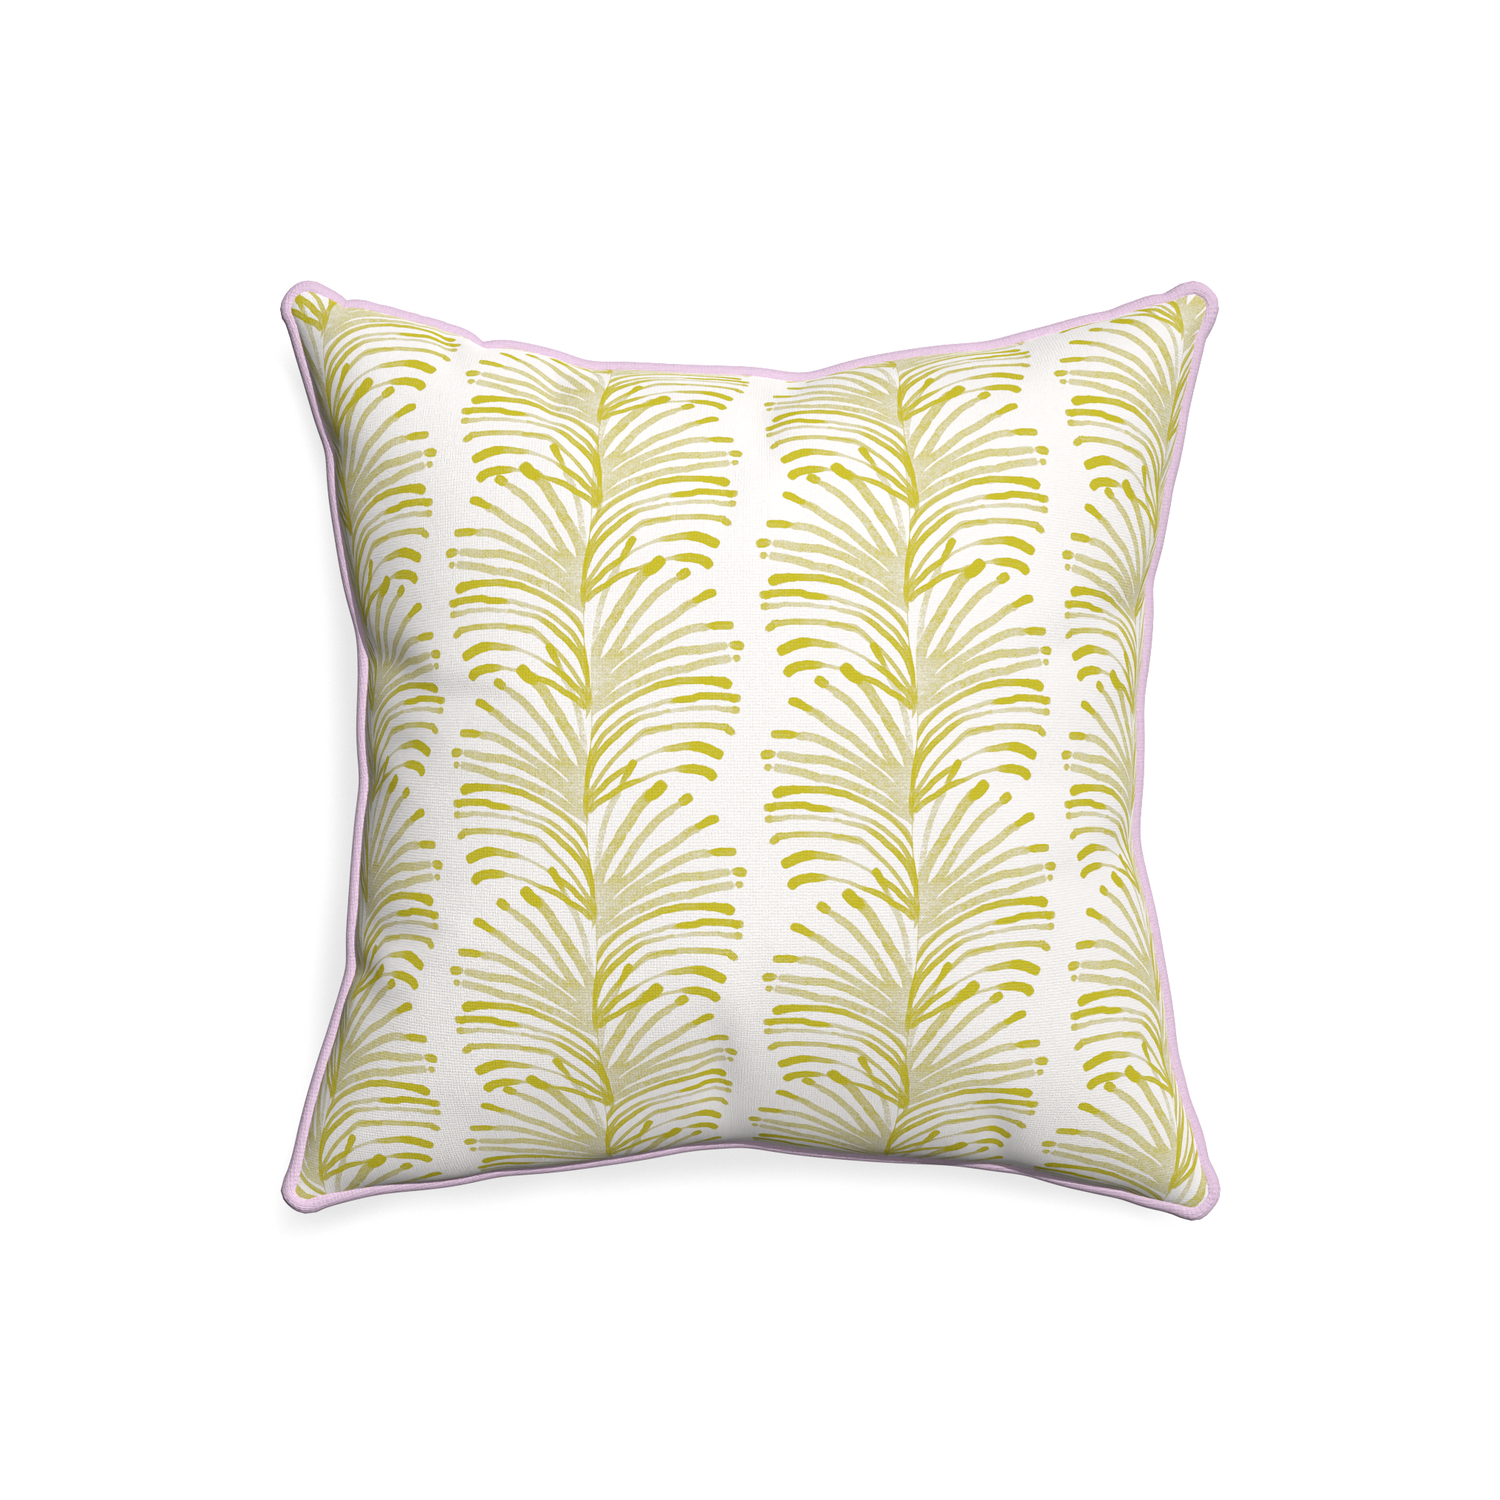 20-square emma chartreuse custom yellow stripe chartreusepillow with l piping on white background